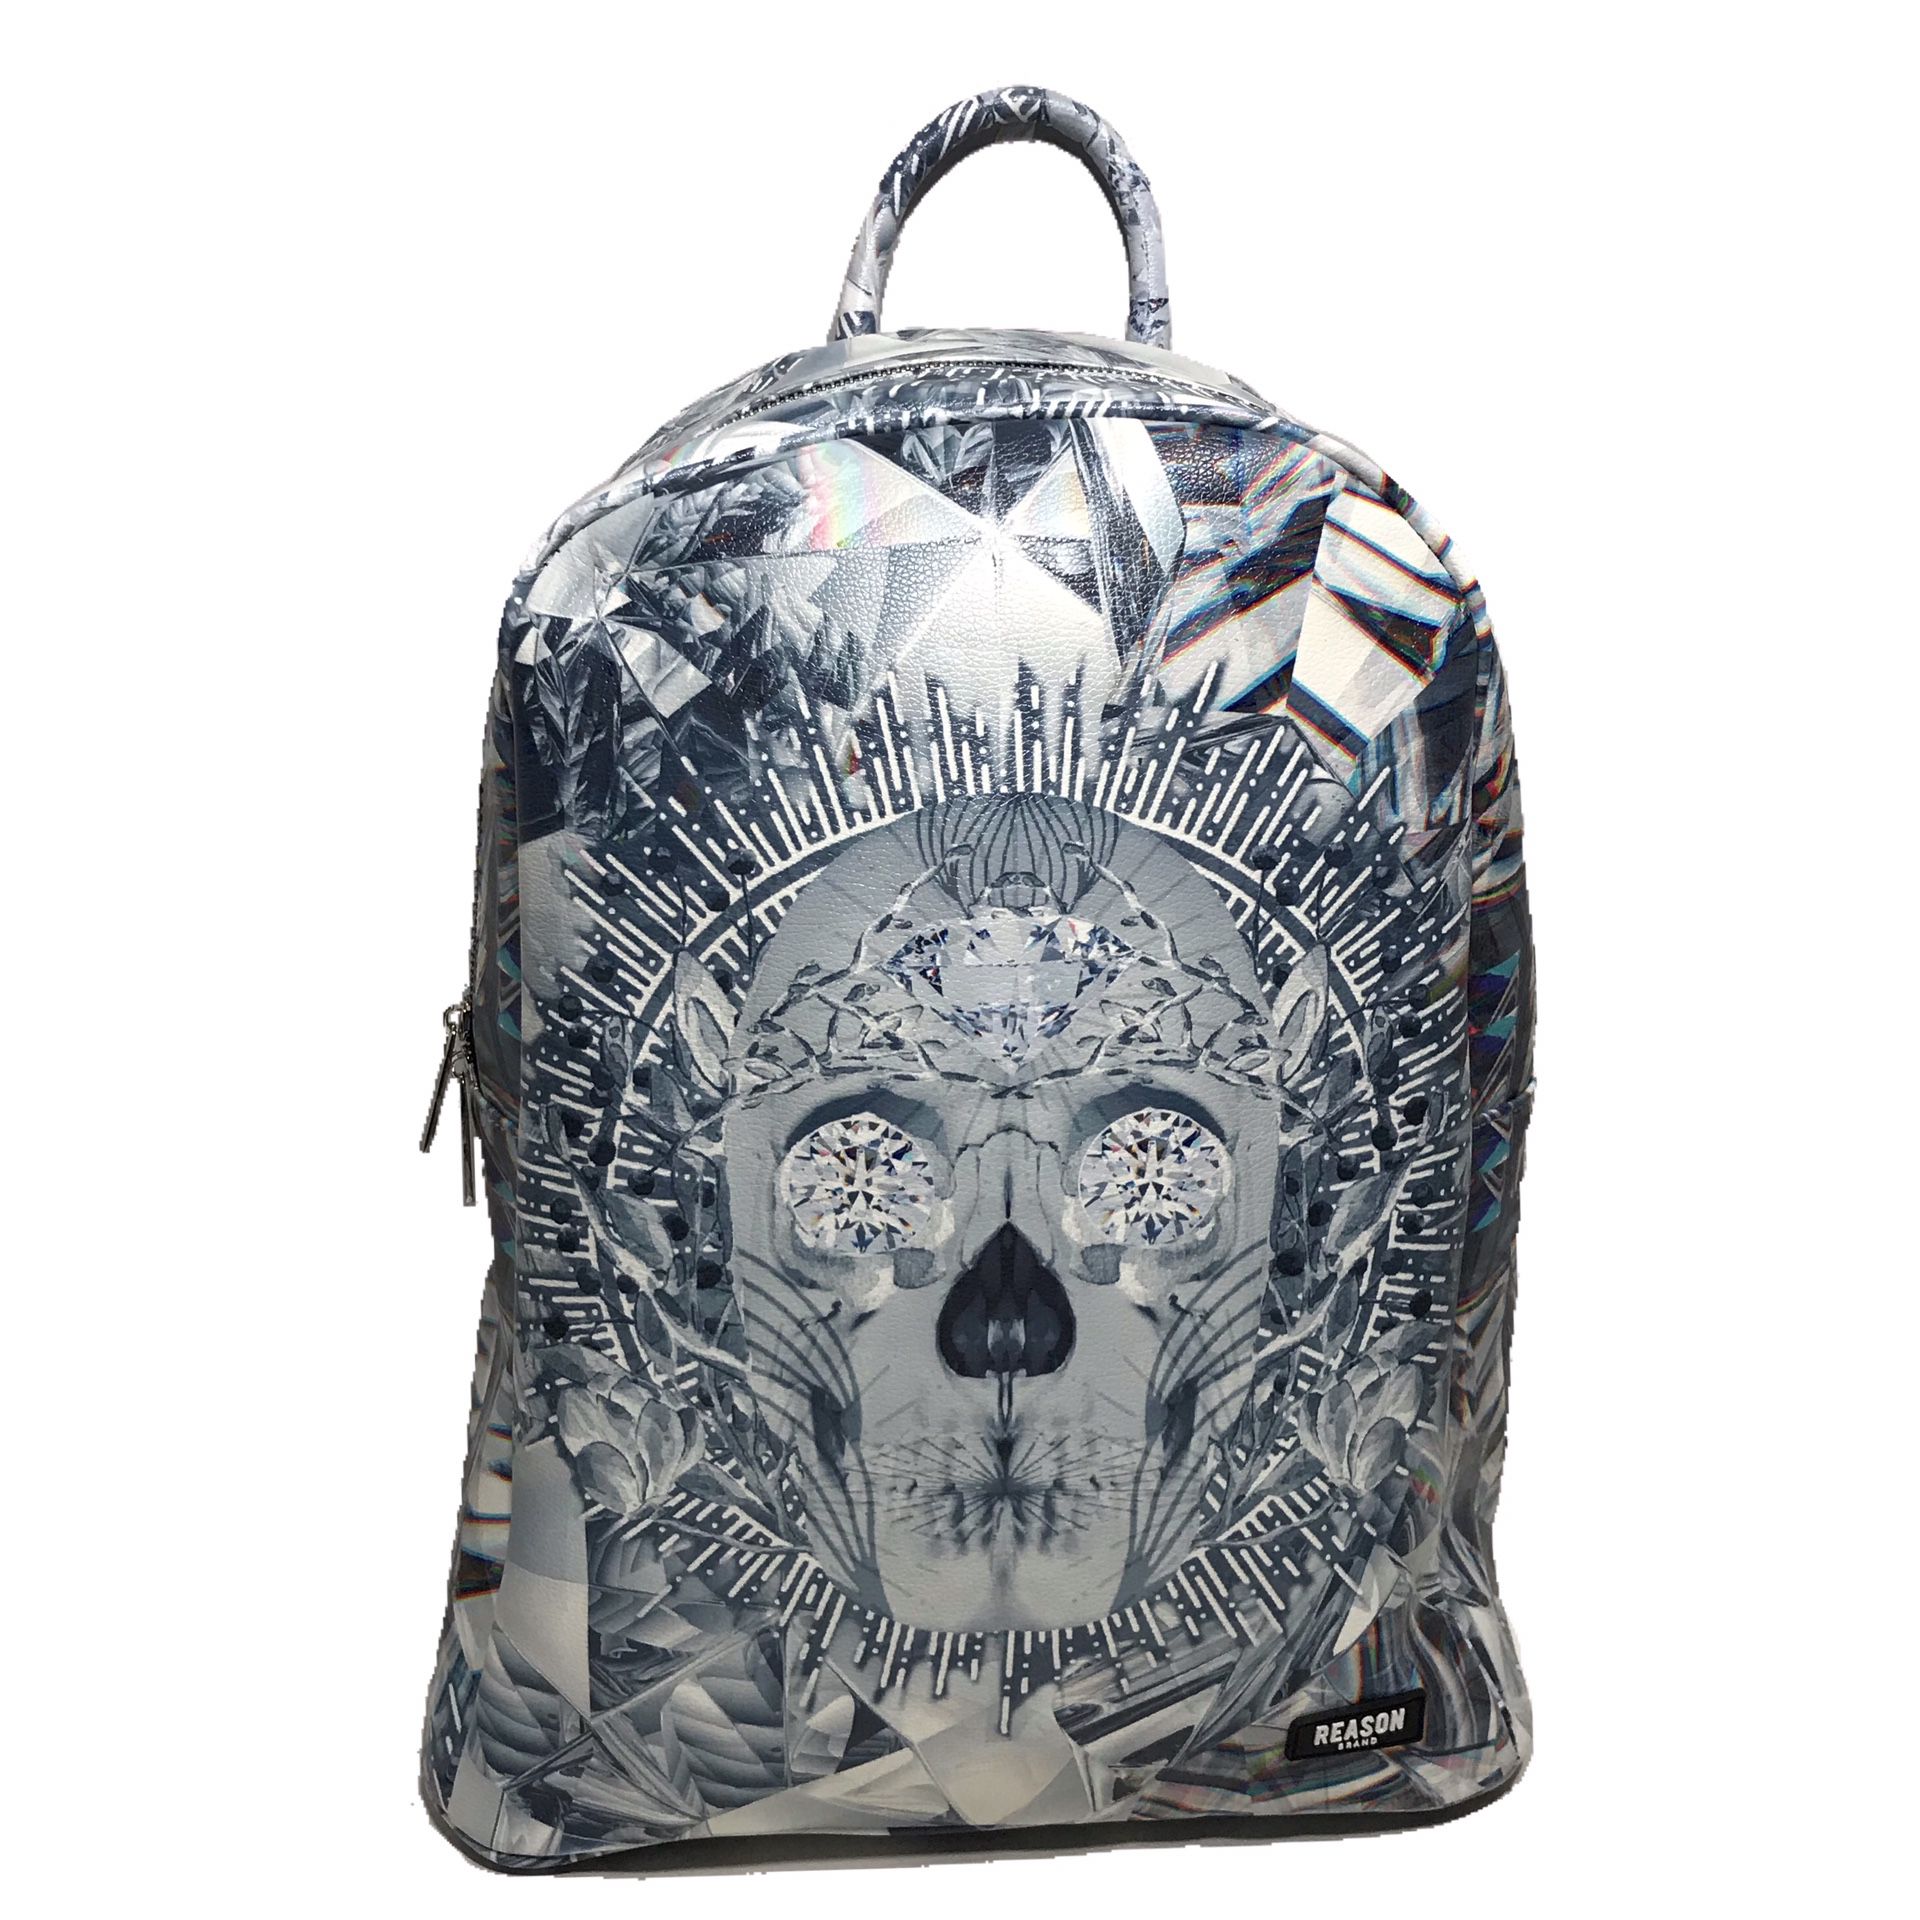 Men’s “Icy” Backpack. 